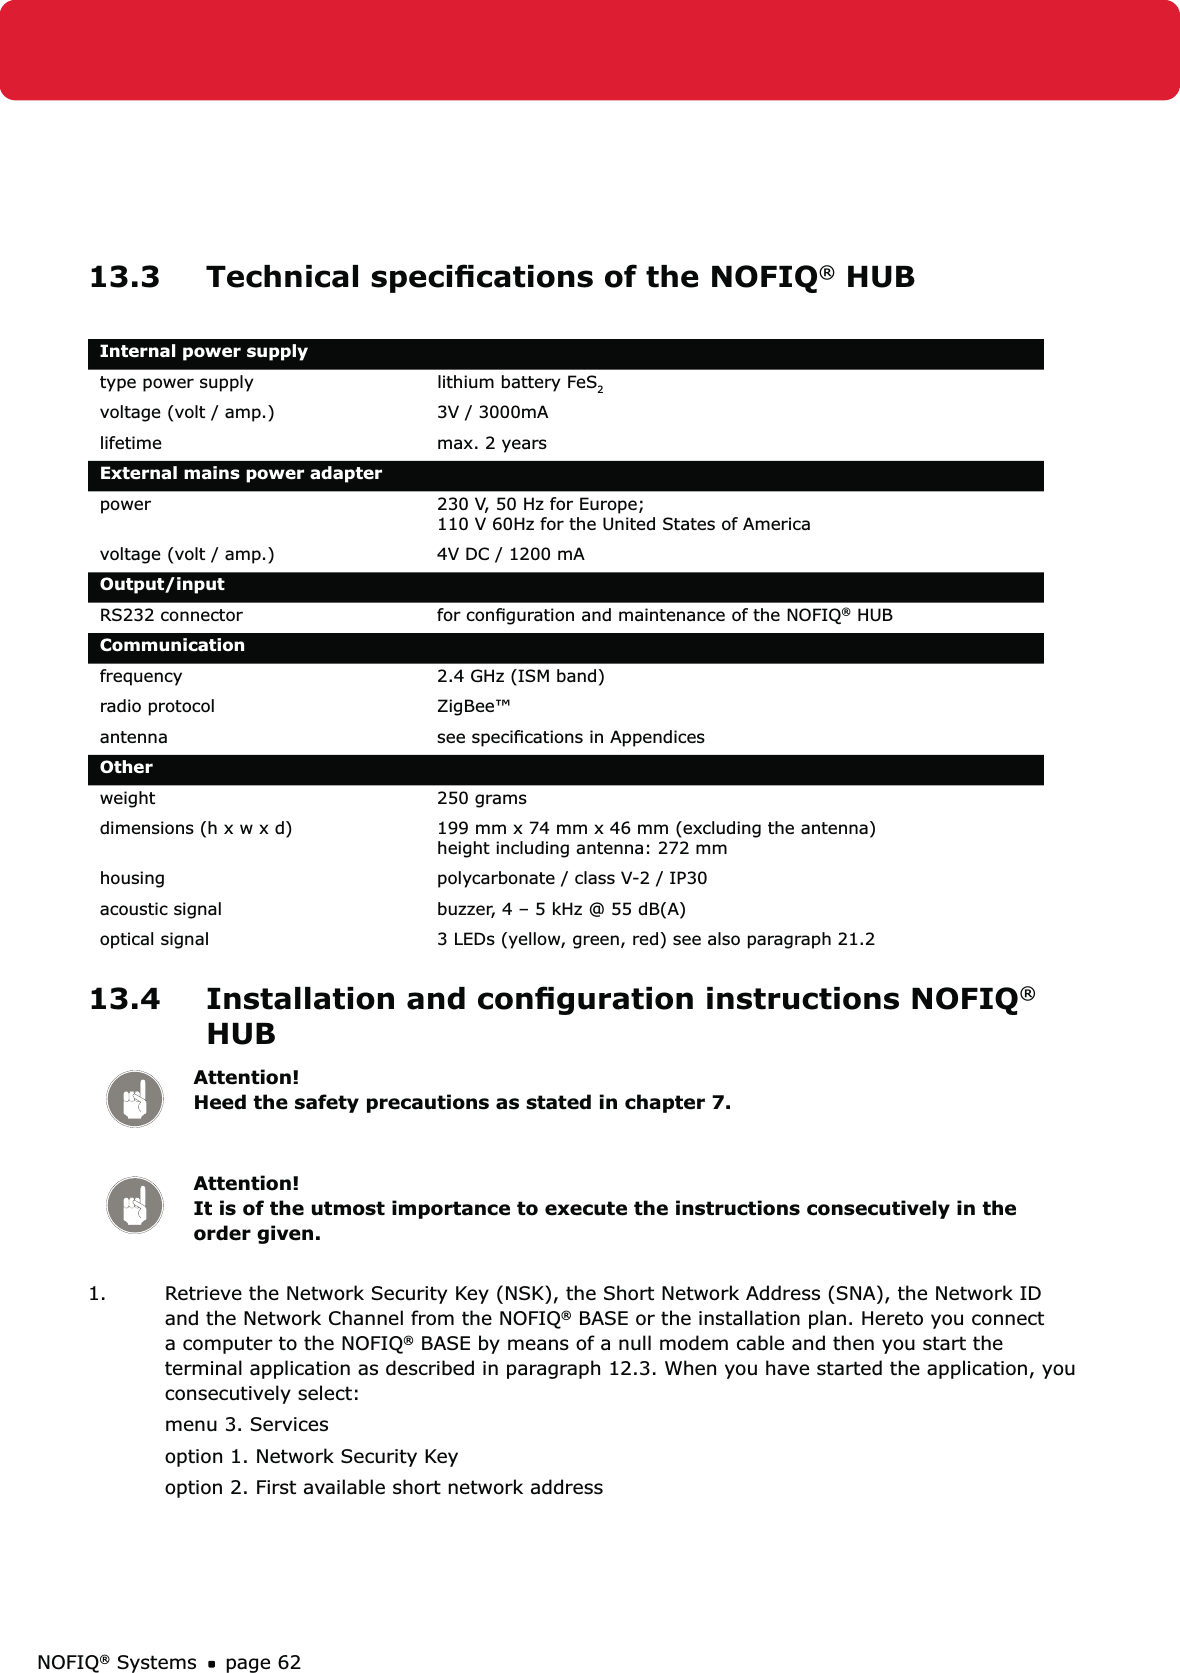 NOFIQ® Systems page 6213.3  Technical speciﬁcations of the NOFIQ® HUBInternal power supplytype power supply  lithium battery FeS2voltage (volt / amp.) 3V / 3000mAlifetime  max. 2 yearsExternal mains power adapterpower 230 V, 50 Hz for Europe;  110 V 60Hz for the United States of Americavoltage (volt / amp.) 4V DC / 1200 mAOutput/inputRS232 connector for conﬁguration and maintenance of the NOFIQ® HUBCommunicationfrequency 2.4 GHz (ISM band)radio protocol ZigBee™antenna see speciﬁcations in AppendicesOther weight 250 gramsdimensions (h x w x d) 199 mm x 74 mm x 46 mm (excluding the antenna) height including antenna: 272 mmhousing  polycarbonate / class V-2 / IP30acoustic signal buzzer, 4 – 5 kHz @ 55 dB(A)optical signal 3 LEDs (yellow, green, red) see also paragraph 21.213.4  Installation and conﬁguration instructions NOFIQ® HUBAttention! Heed the safety precautions as stated in chapter 7.Attention! It is of the utmost importance to execute the instructions consecutively in the order given.1.  Retrieve the Network Security Key (NSK), the Short Network Address (SNA), the Network ID and the Network Channel from the NOFIQ® BASE or the installation plan. Hereto you connect a computer to the NOFIQ® BASE by means of a null modem cable and then you start the terminal application as described in paragraph 12.3. When you have started the application, you consecutively select:menu 3. Services option 1. Network Security Keyoption 2. First available short network address 